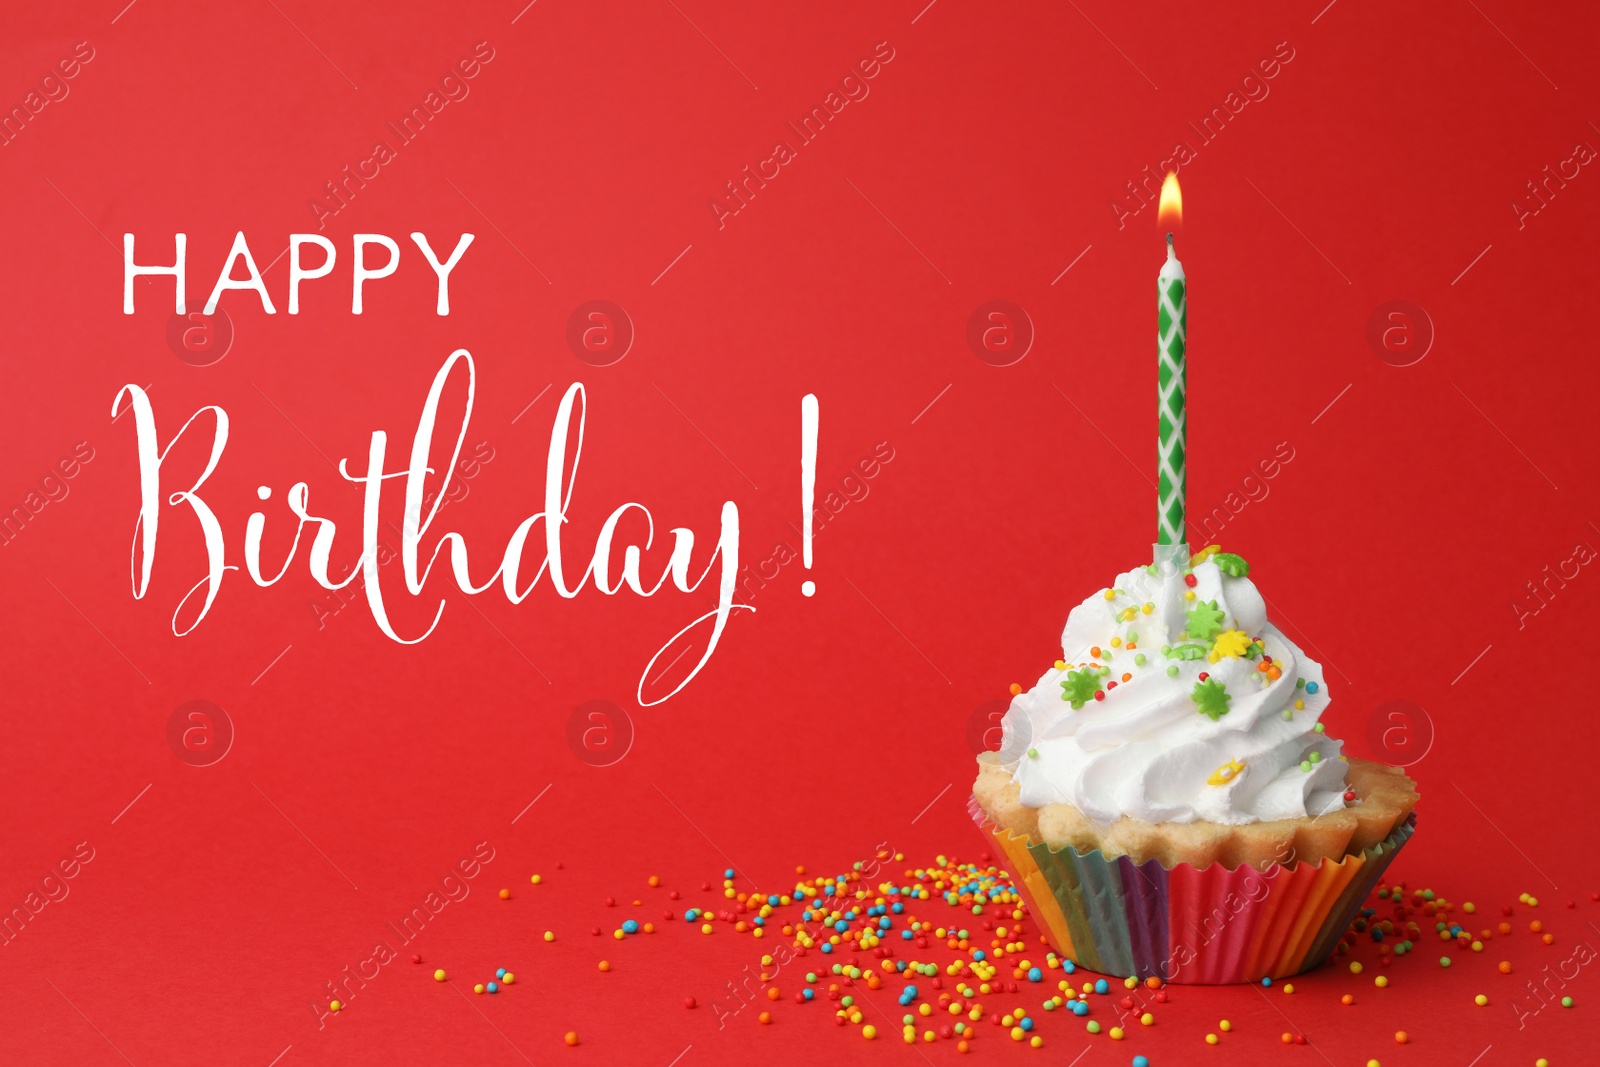 Image of Happy Birthday! Delicious cupcake with candle on red background